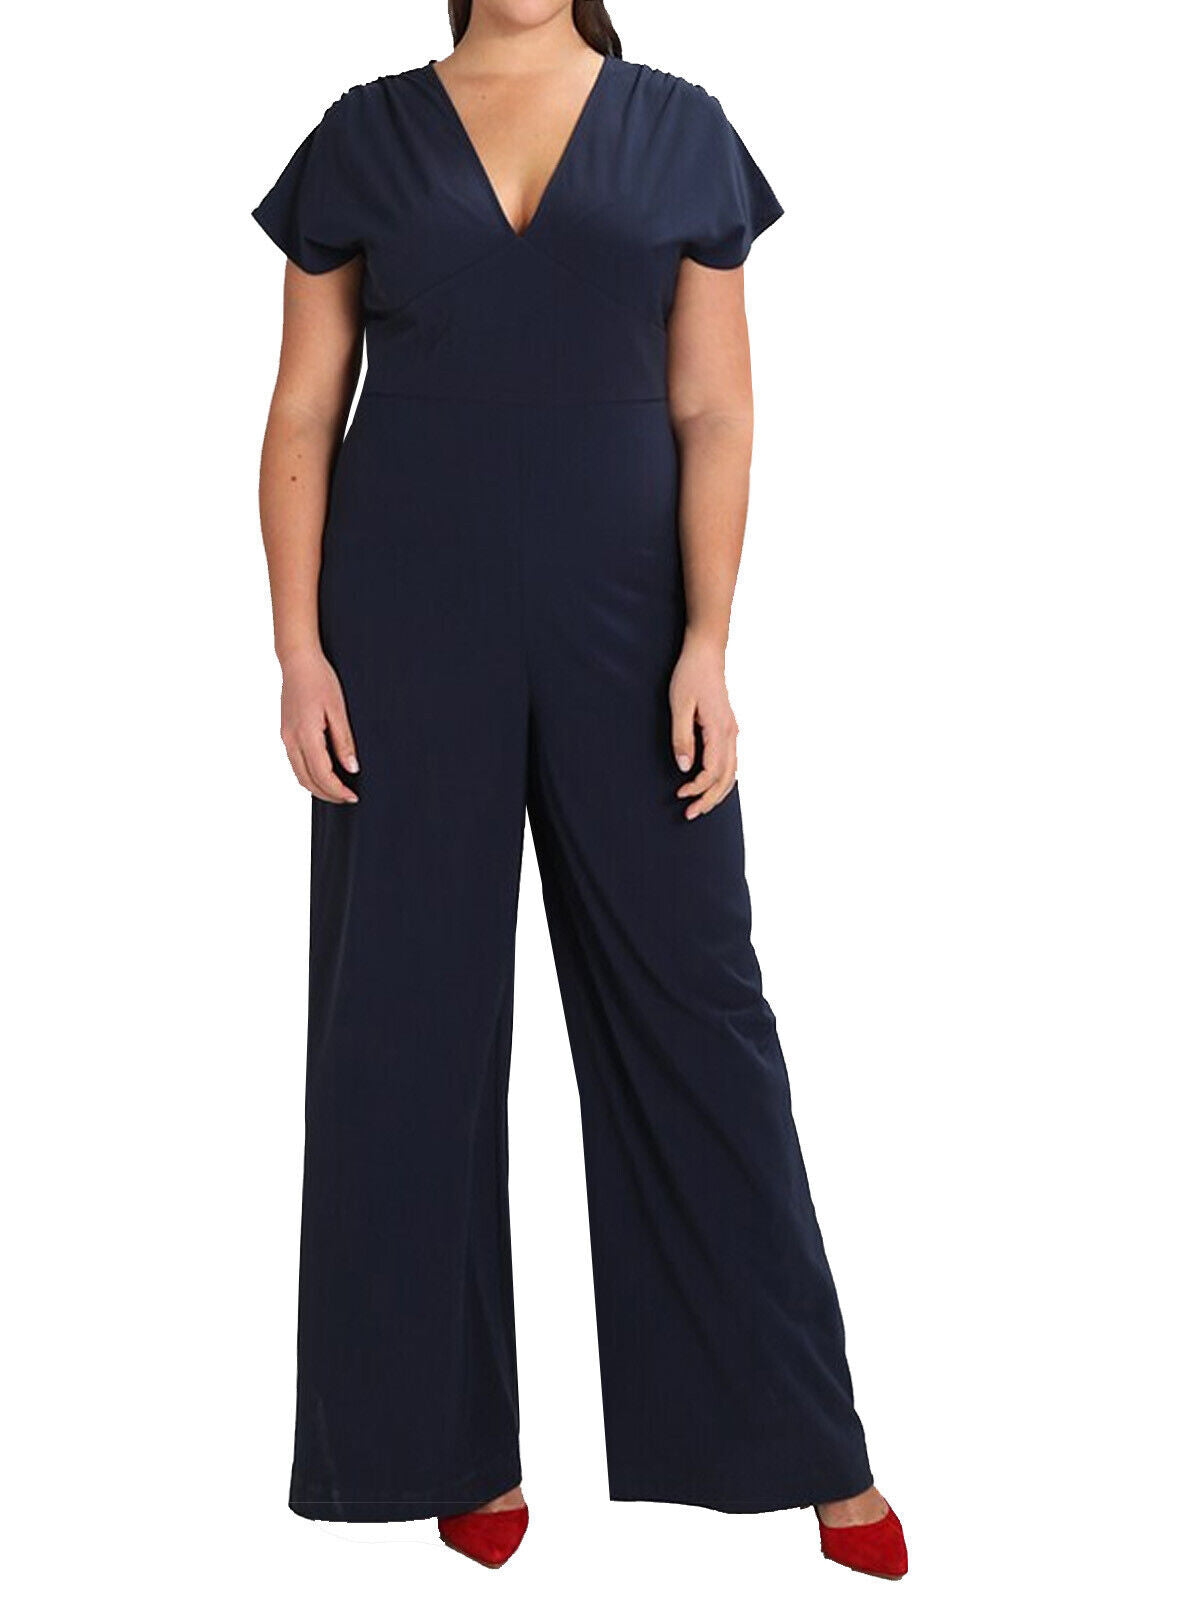 Second Script Curve Navy Empire Waist V-Neck Jumpsuit Sizes 18 or 20 TALL